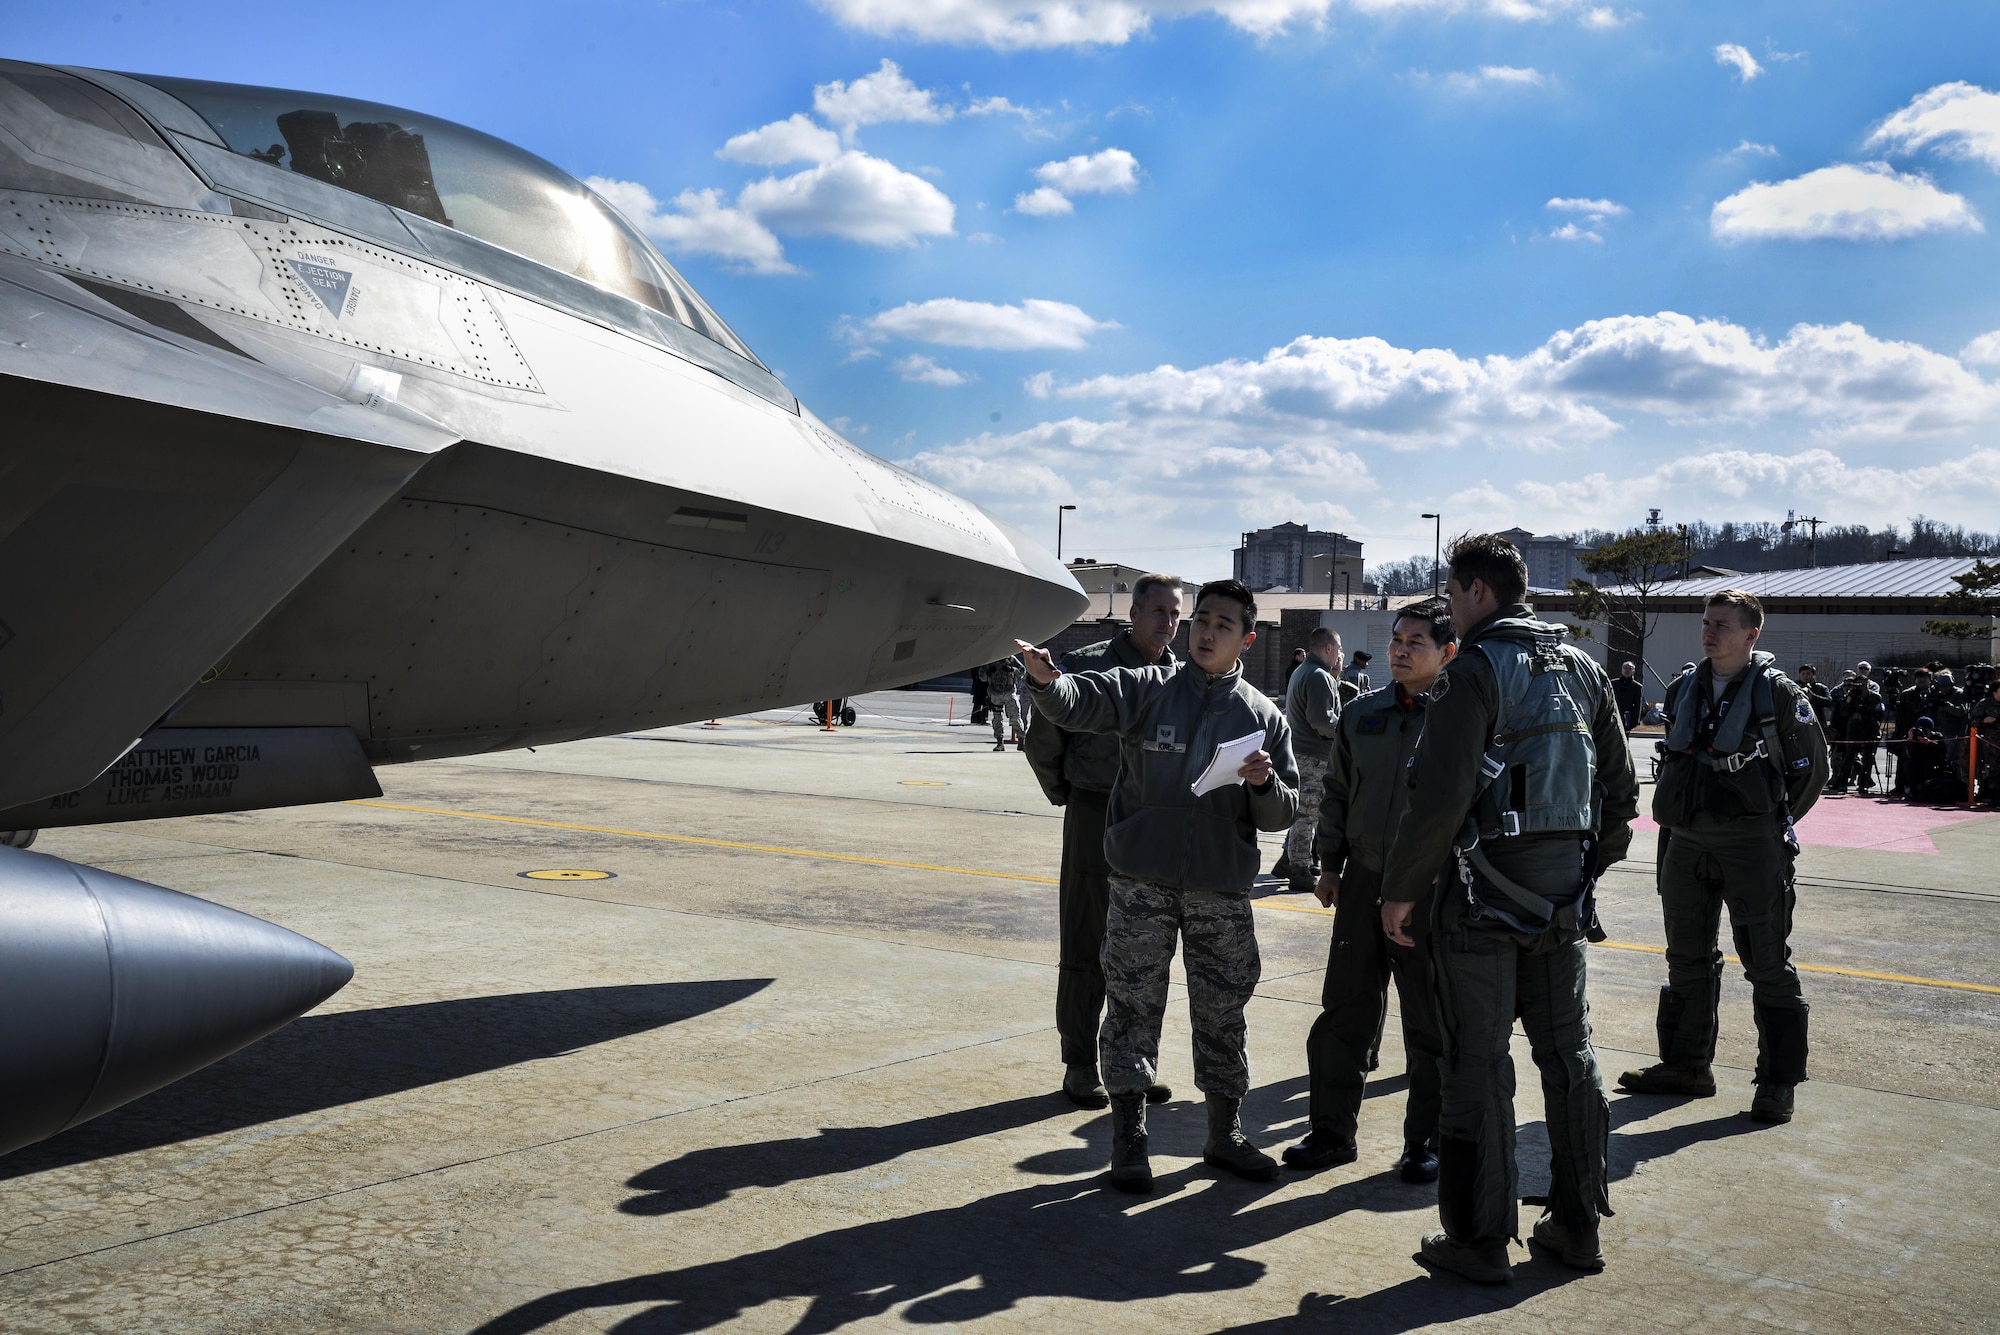 Chief of Staff of the Republic of Korea air force Gen. Jeong, Kyeong-doo (middle) receives a translated briefing from an F-22 Raptor pilot after conducting a flyover in the vicinity of Osan Air Base, South Korea, in response to recent provocative action by North Korea Feb. 17, 2016. F-22 Raptors were joined by four F-15 Slam Eagles and U.S. Air Force F-16 Fighting Falcons. The F-22 is designed to project air dominance rapidly and at great distances and currently cannot be matched by any known or projected fighter aircraft.  (U.S. Air Force photo by Tech. Sgt. Travis Edwards/Released)